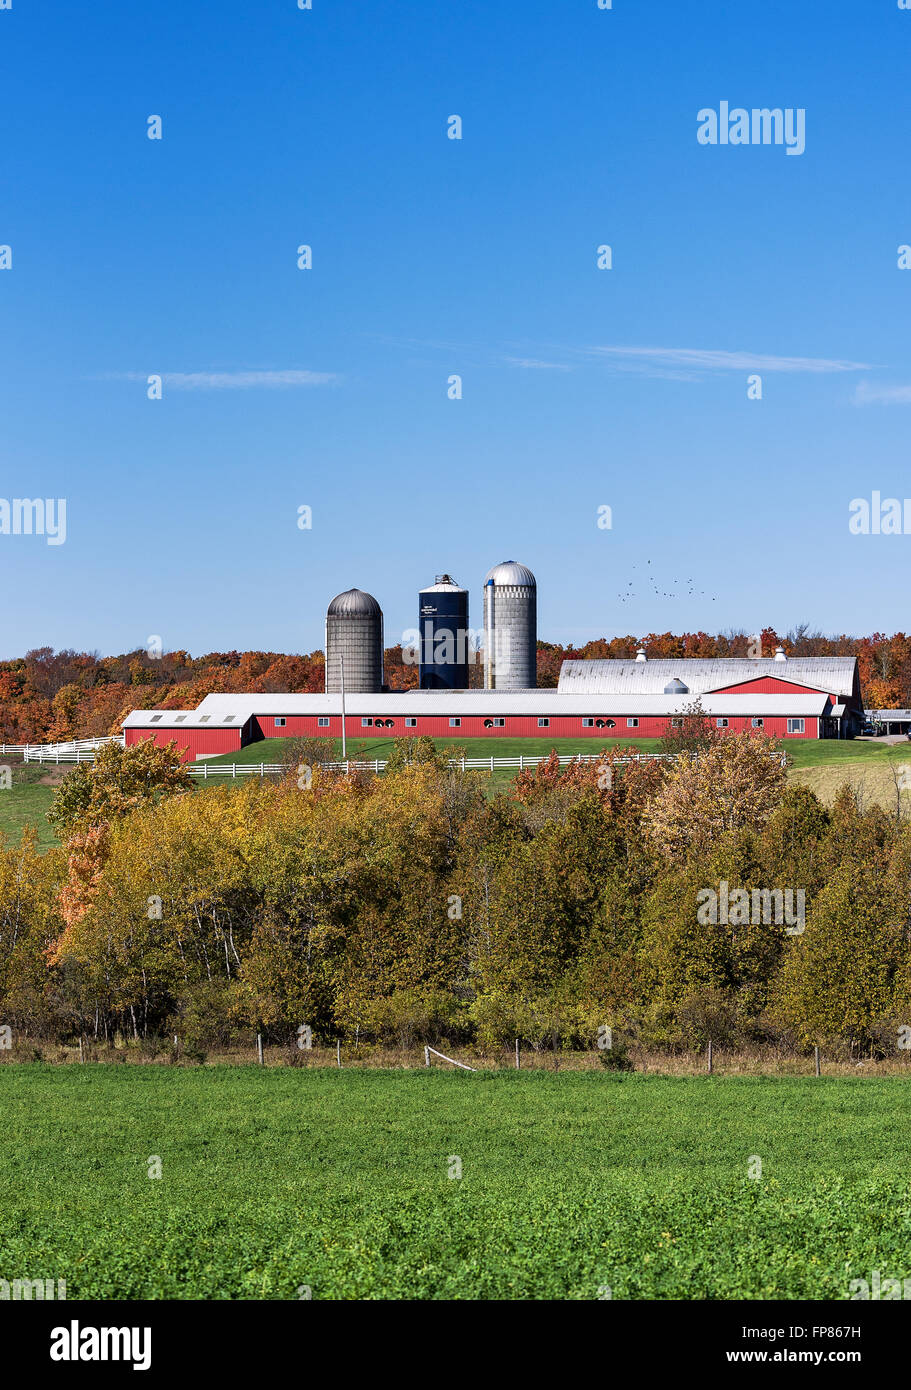 Cheval rustique barn, Richfield Springs, New York, USA Banque D'Images